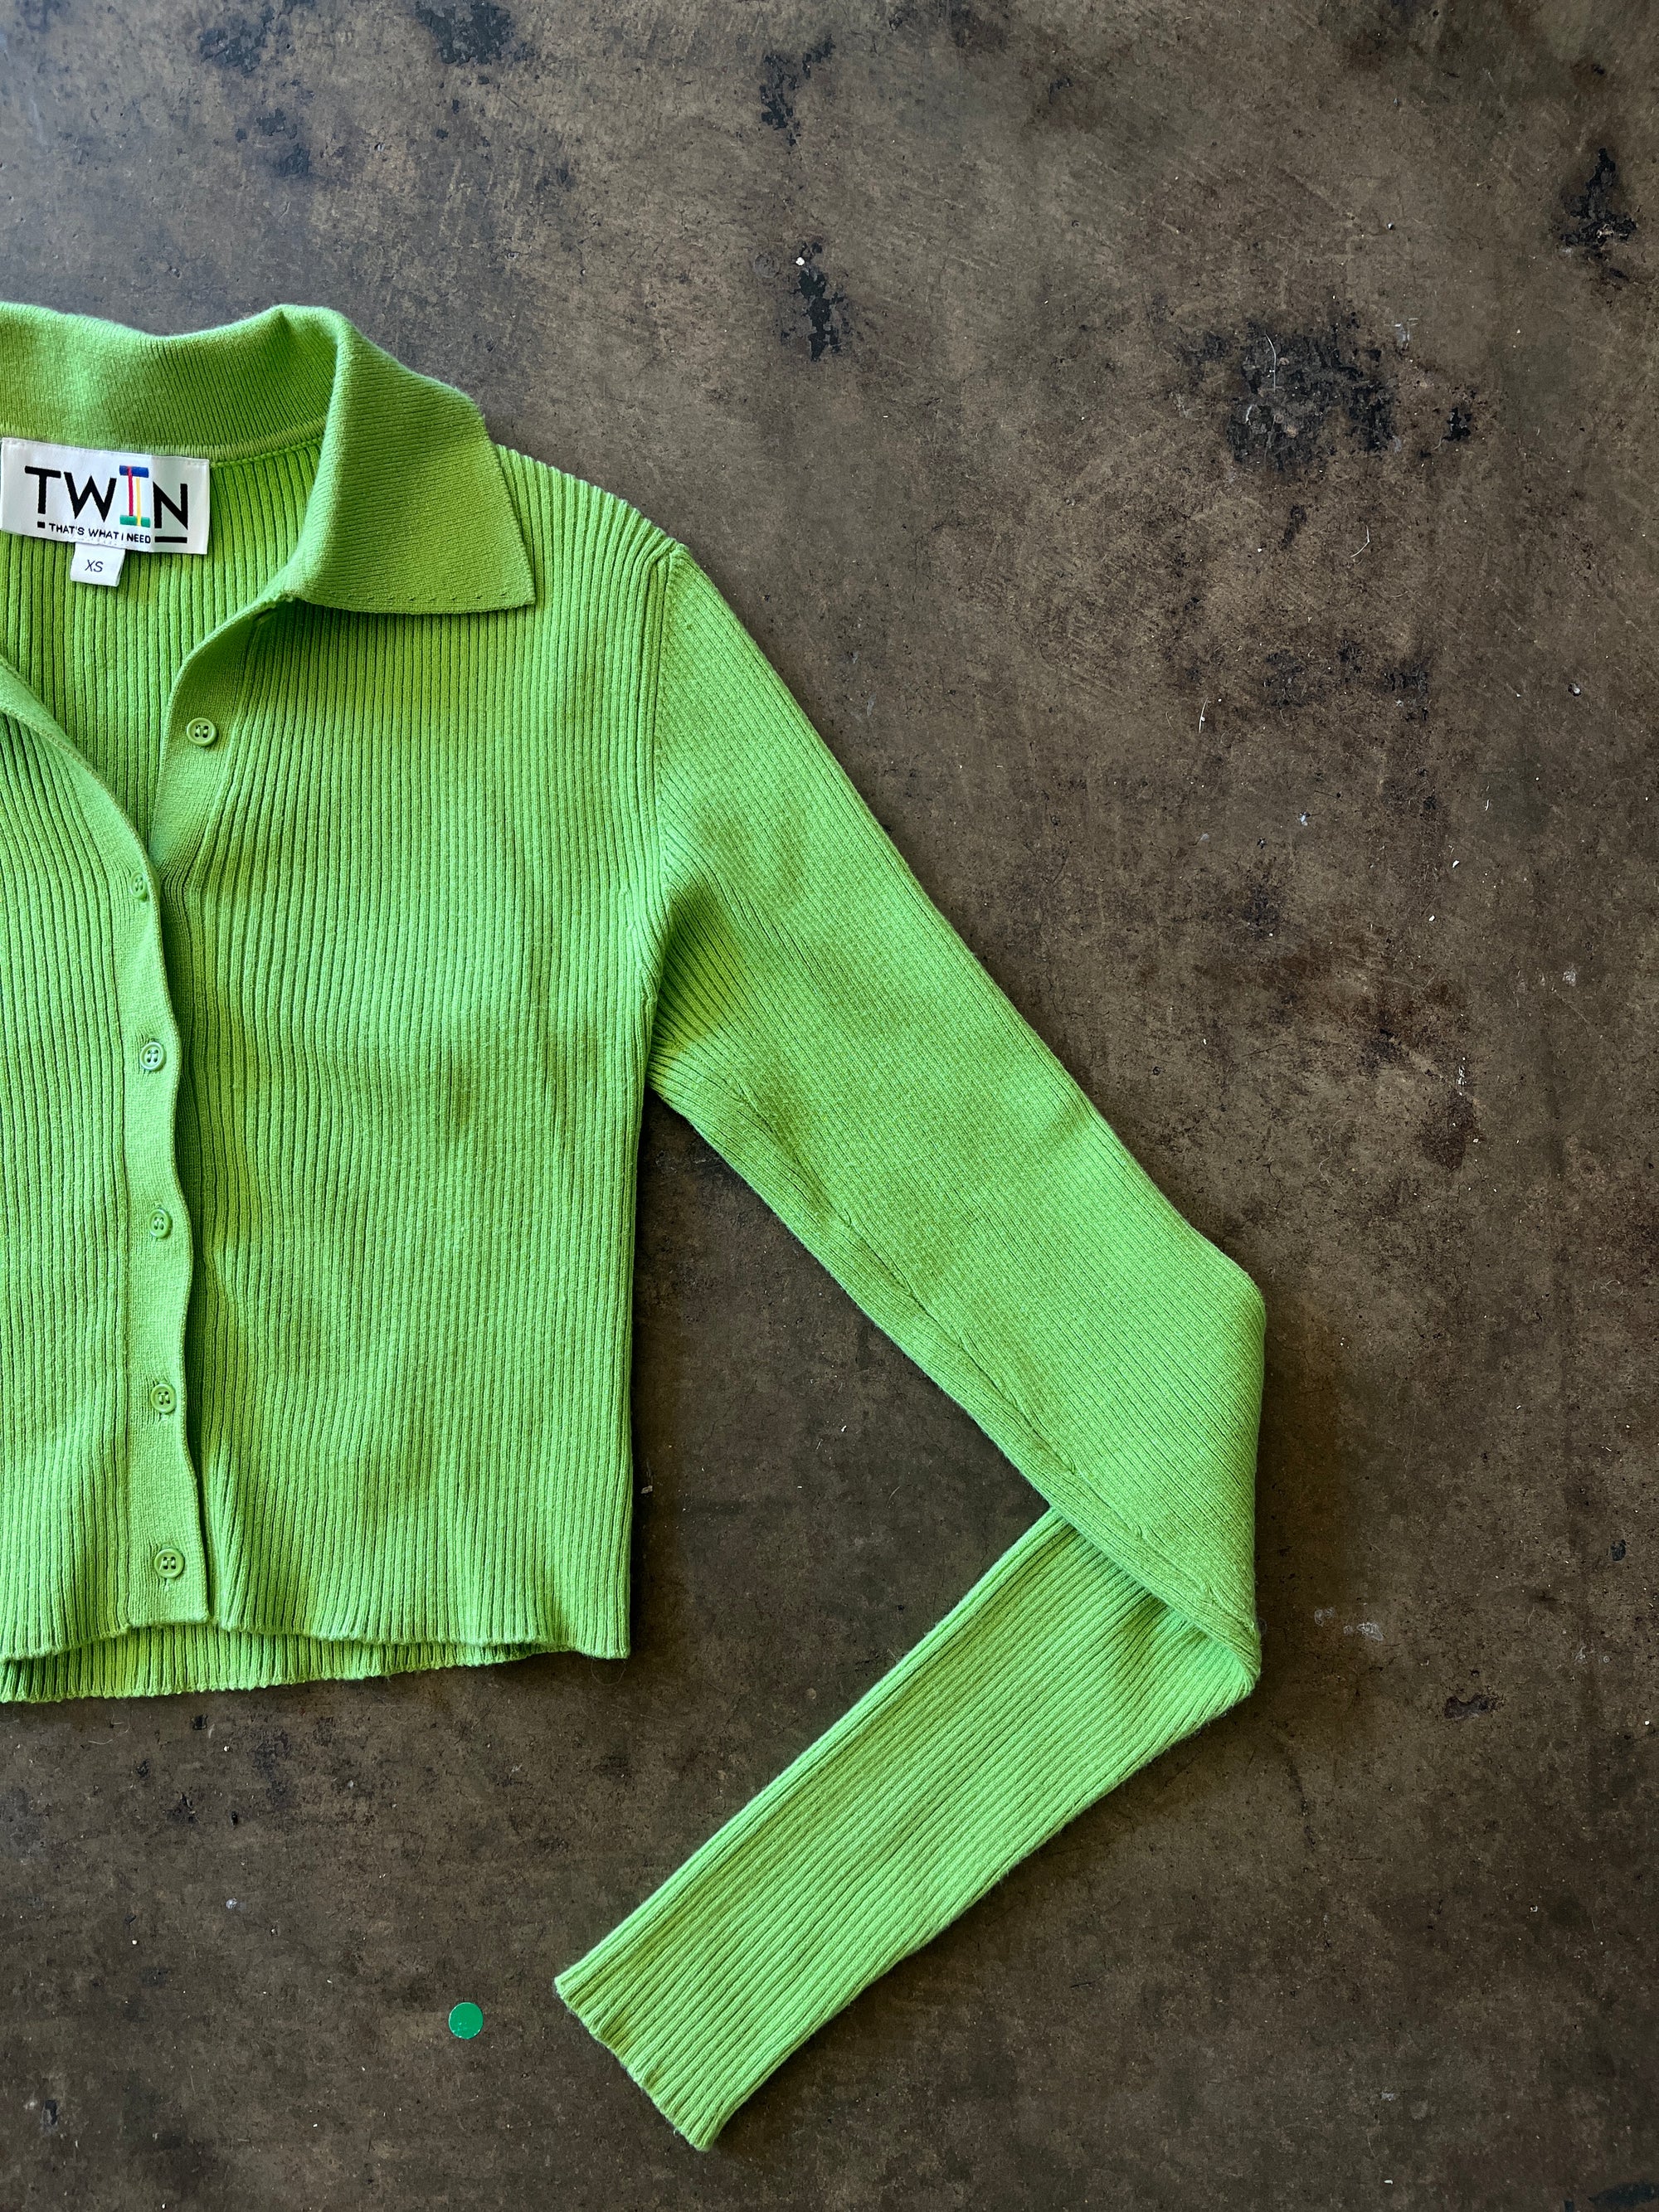 TWIN Green Button Front Long Sleeve